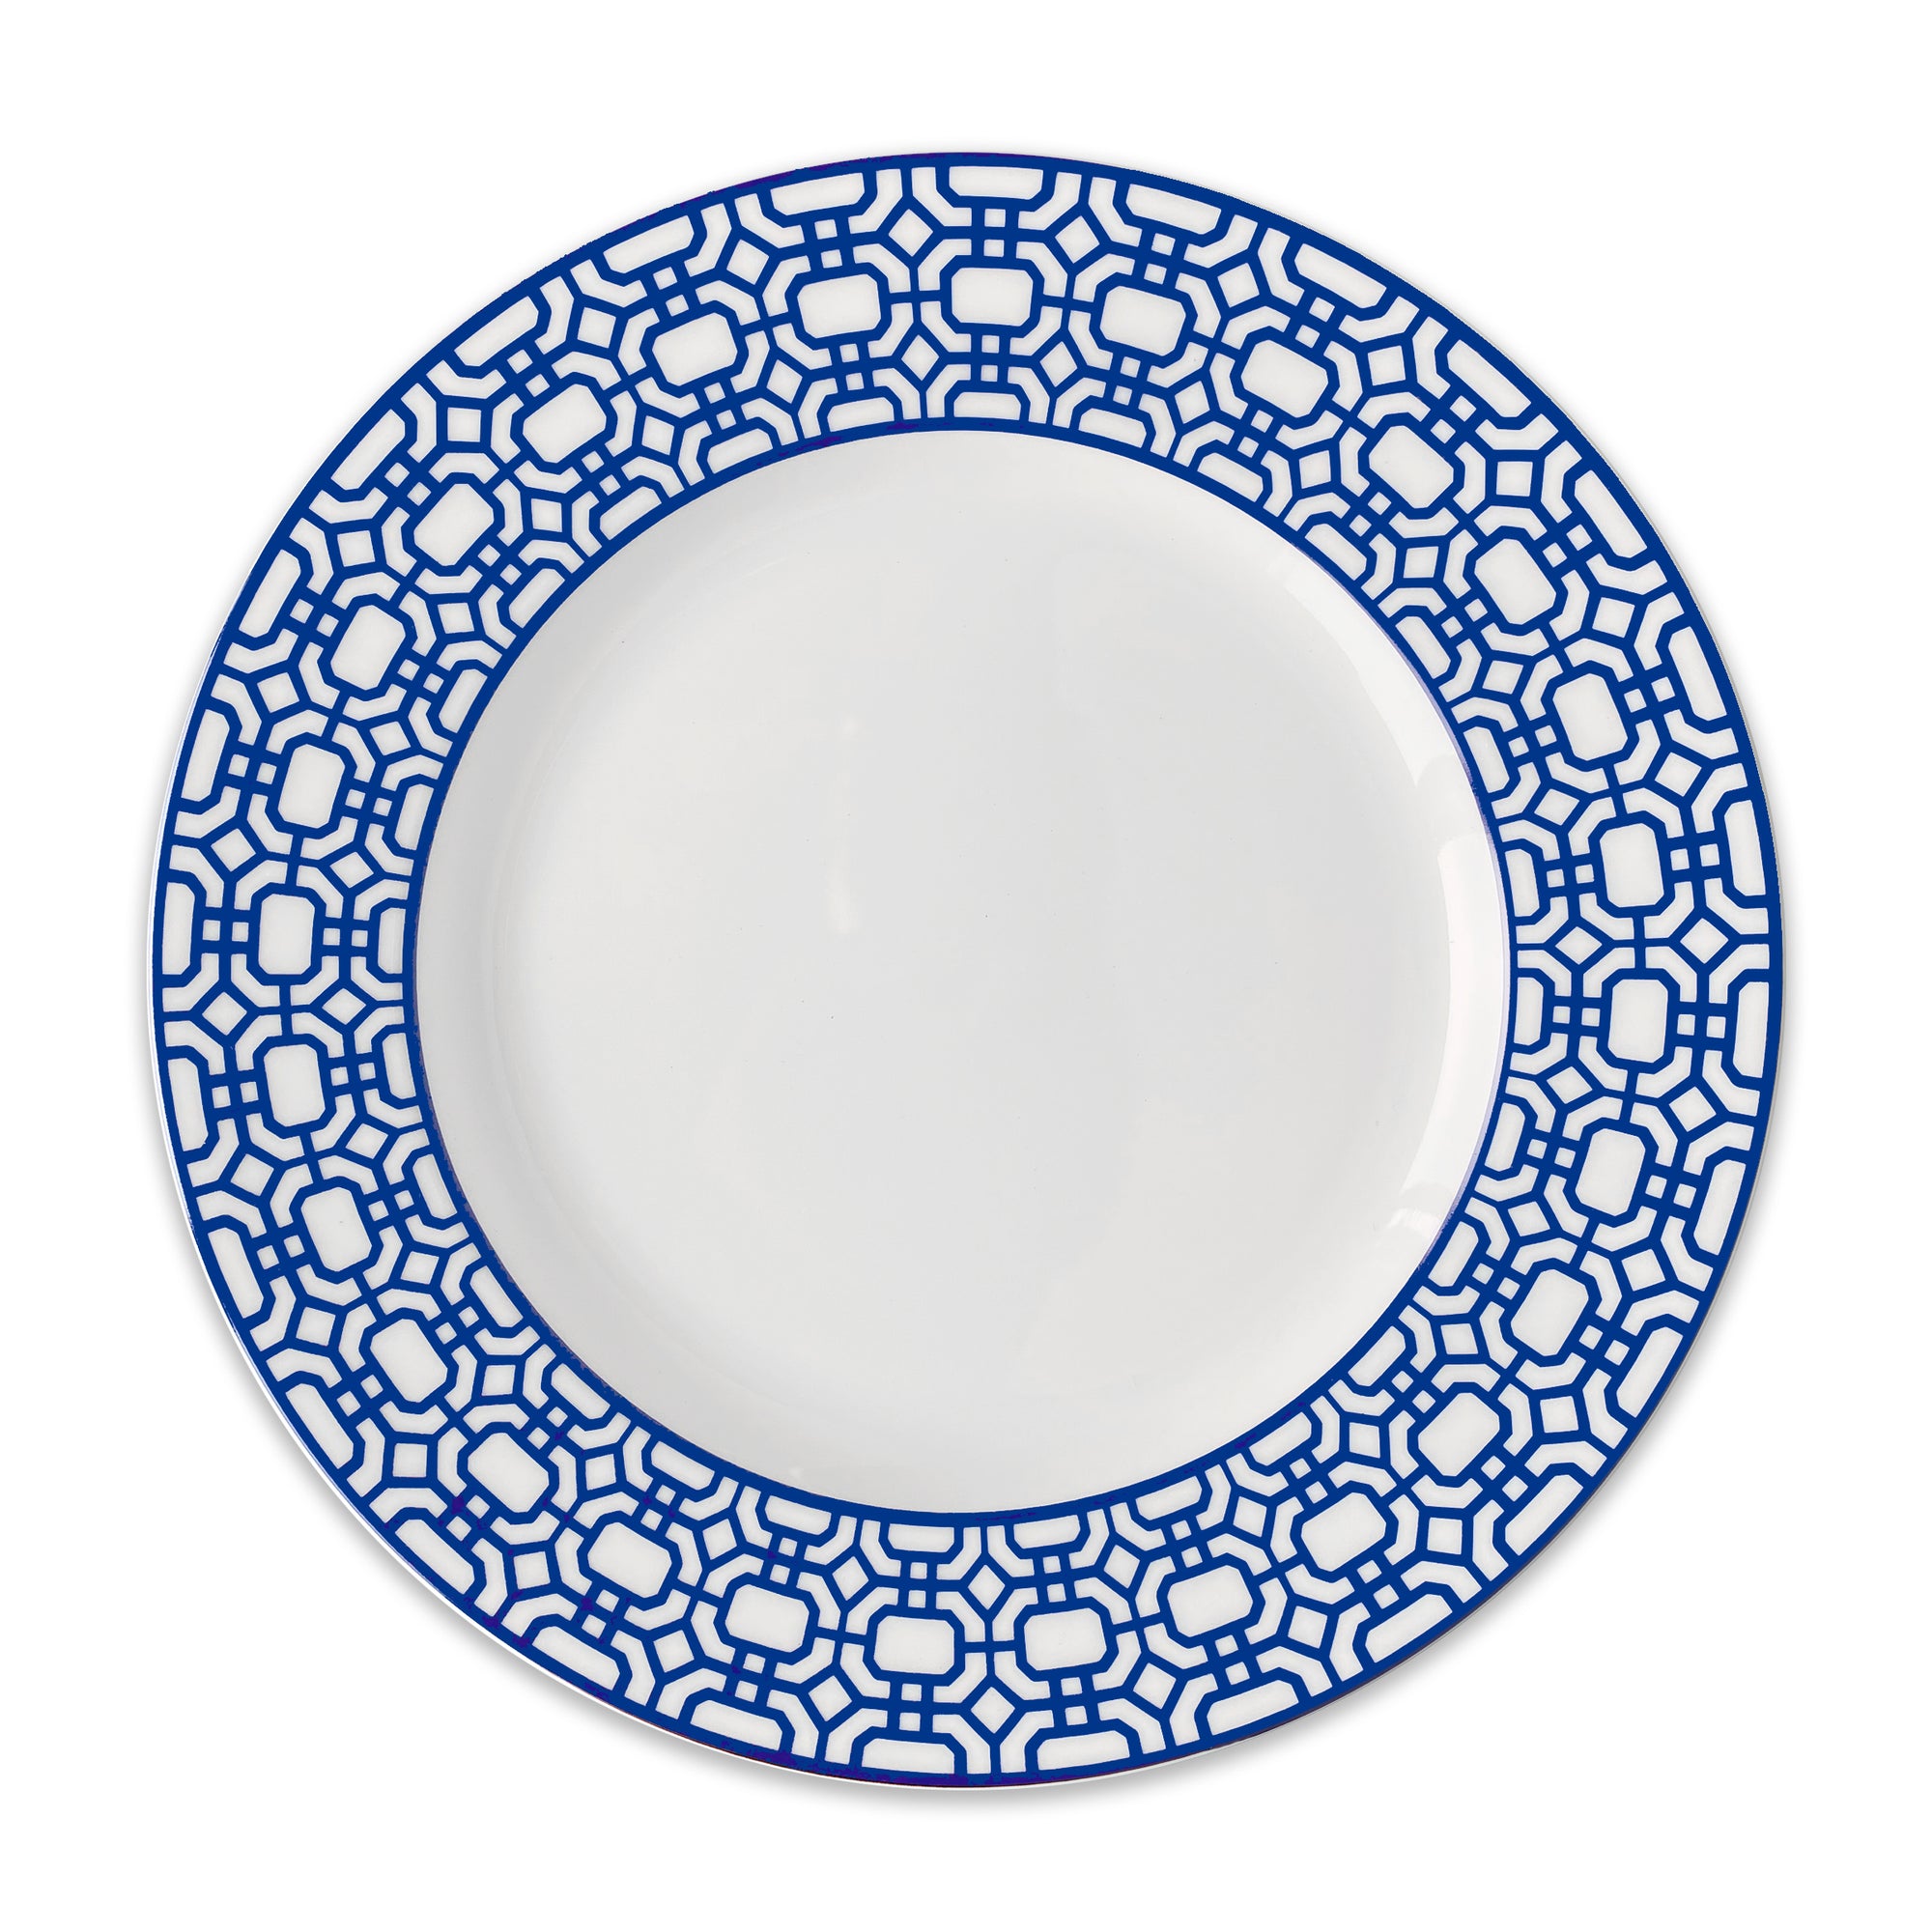 A Newport Garden Gate Rimmed Dinner Plate by Caskata Artisanal Home featuring a geometric blue pattern along the rim, perfect for any contemporary dinnerware or coastal collections.